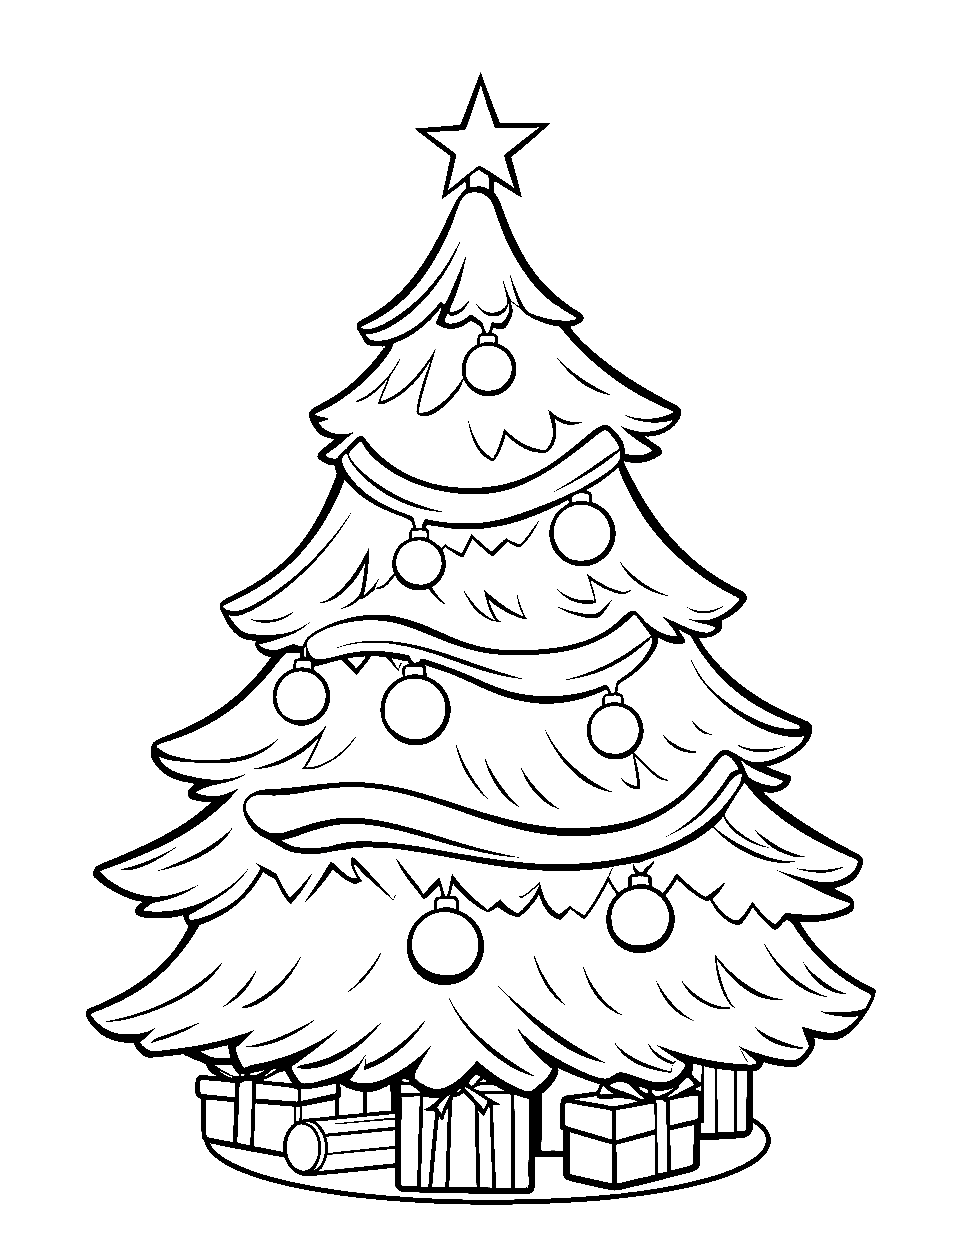 X-traordinary Xmas Coloring Page - A Christmas tree with presents underneath.